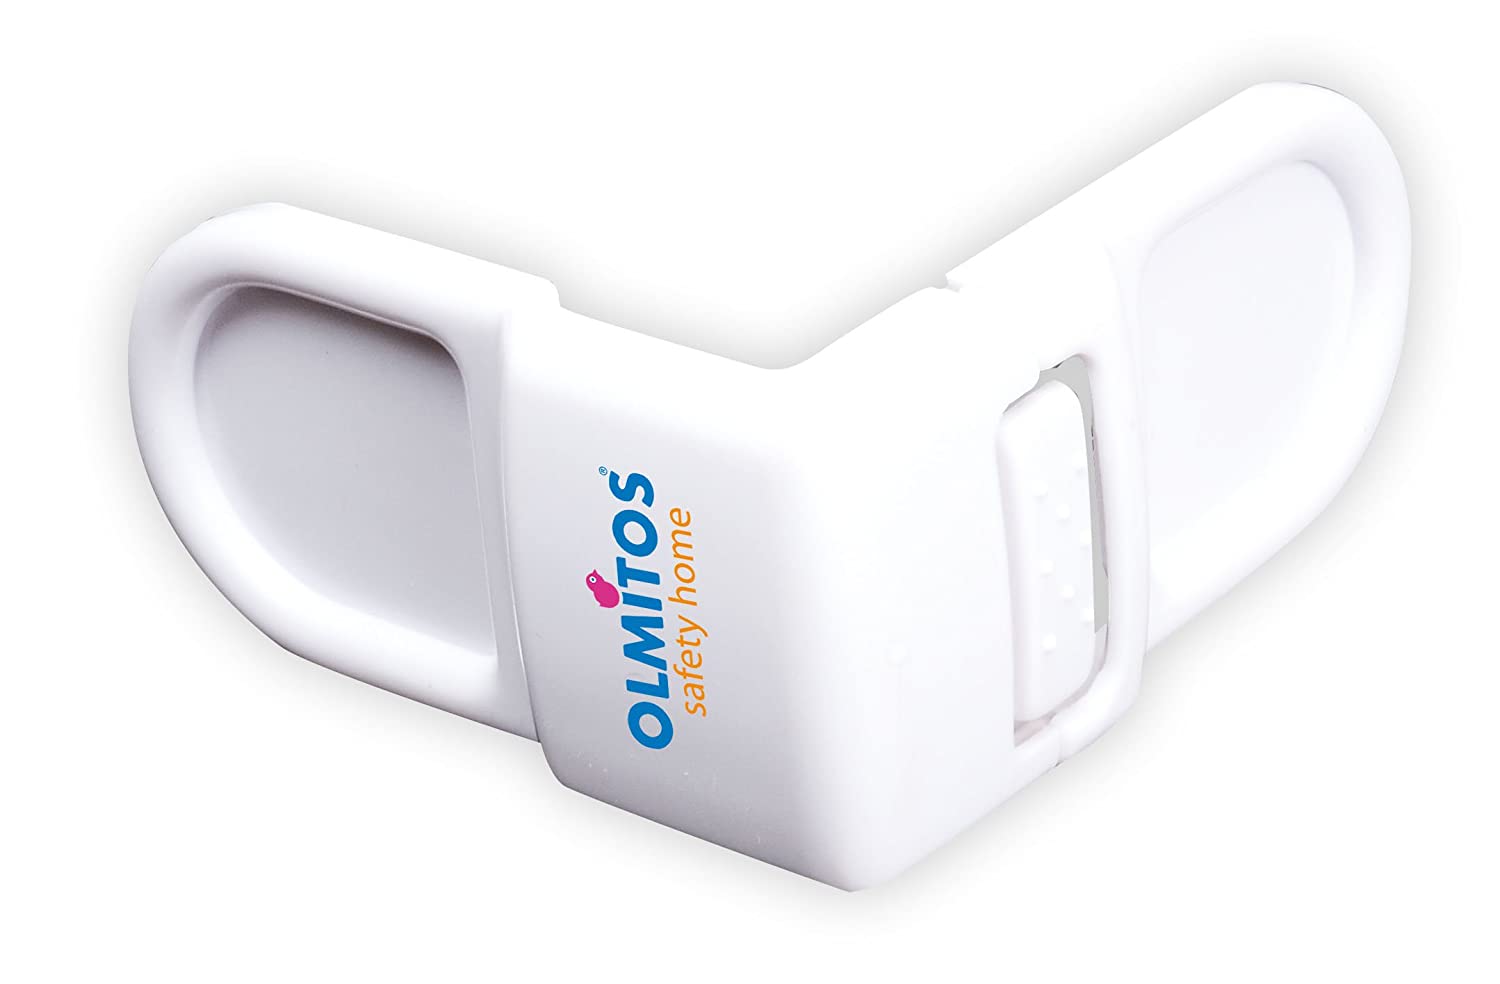 Olmitos Angulo Safety Catch - Baby Safety Product